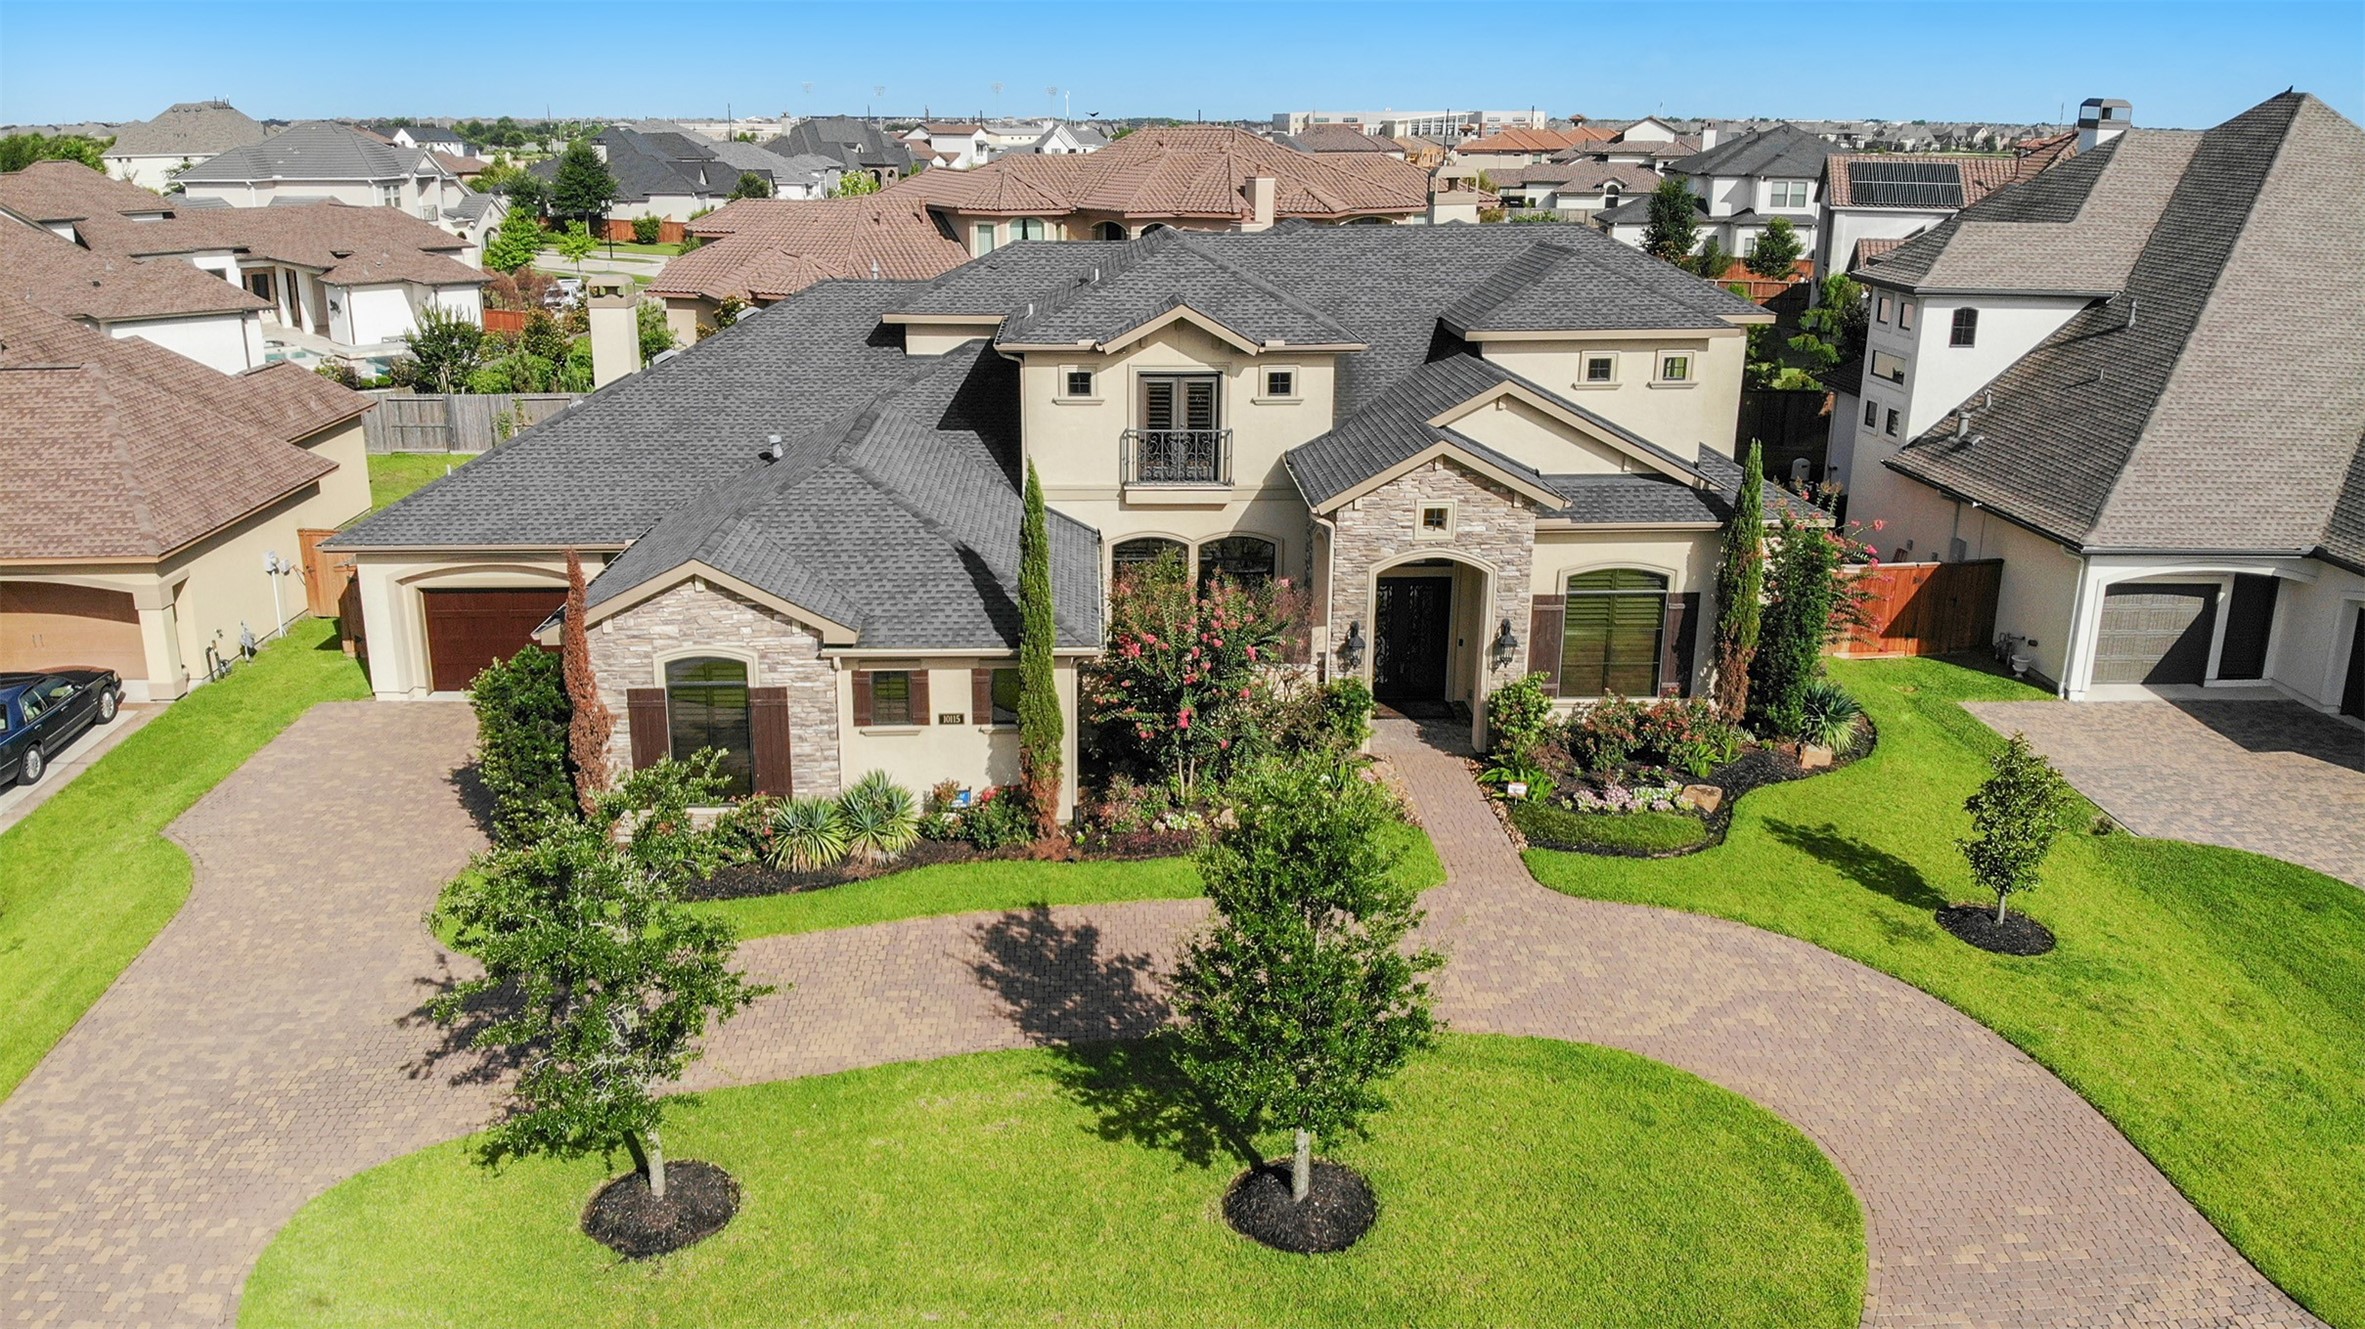 Welcome Home to 10115 E. Frio River Circle located in the private gated community of Waters Edge.